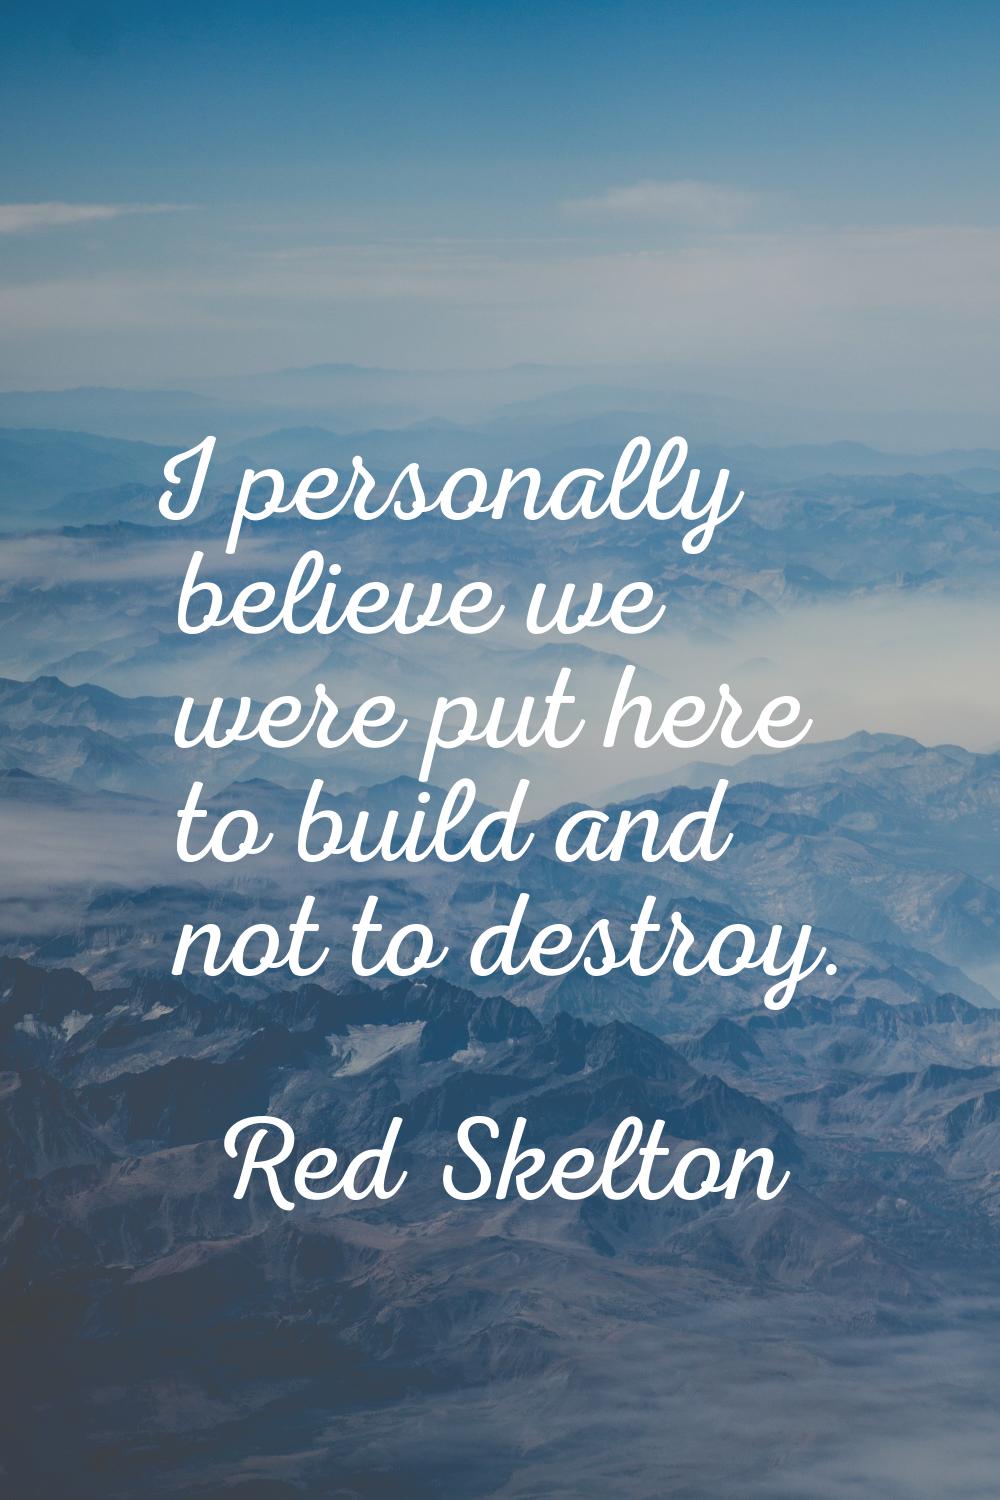 I personally believe we were put here to build and not to destroy.